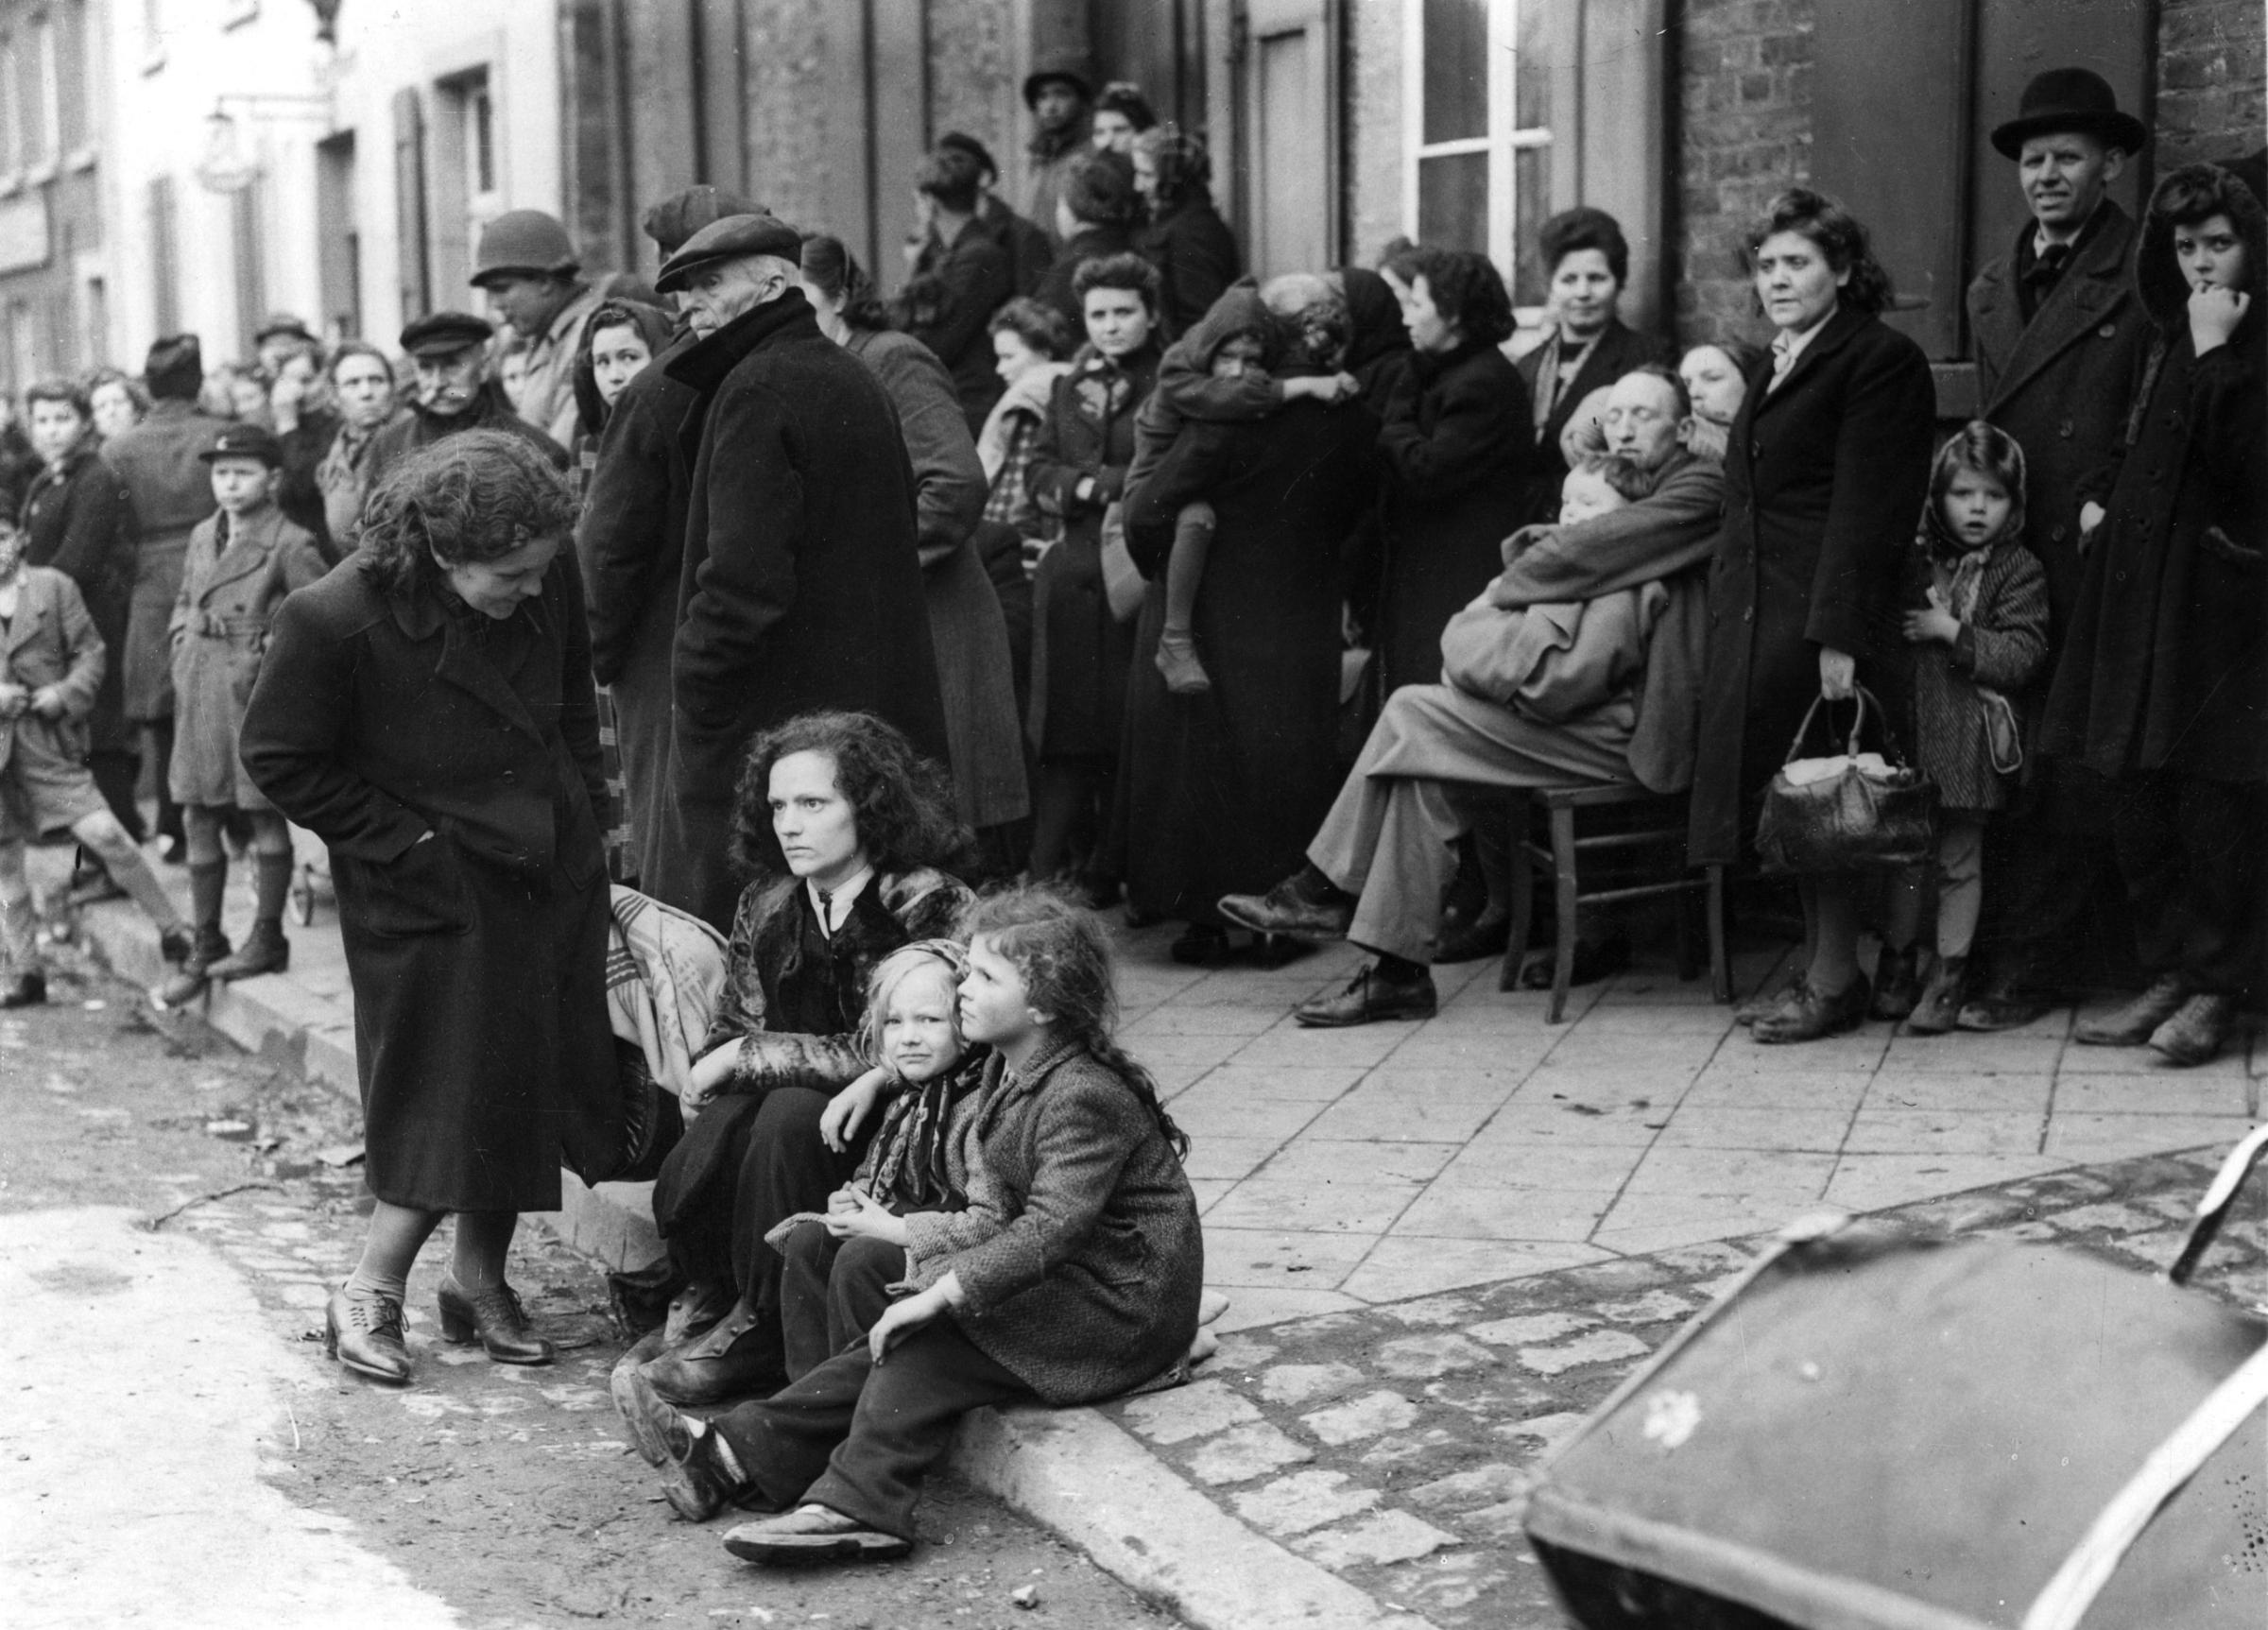 3rd March 1945: German refugees crowding the market square at Juchen, Germany, a town captured by the US Army at the end of the Second World War.